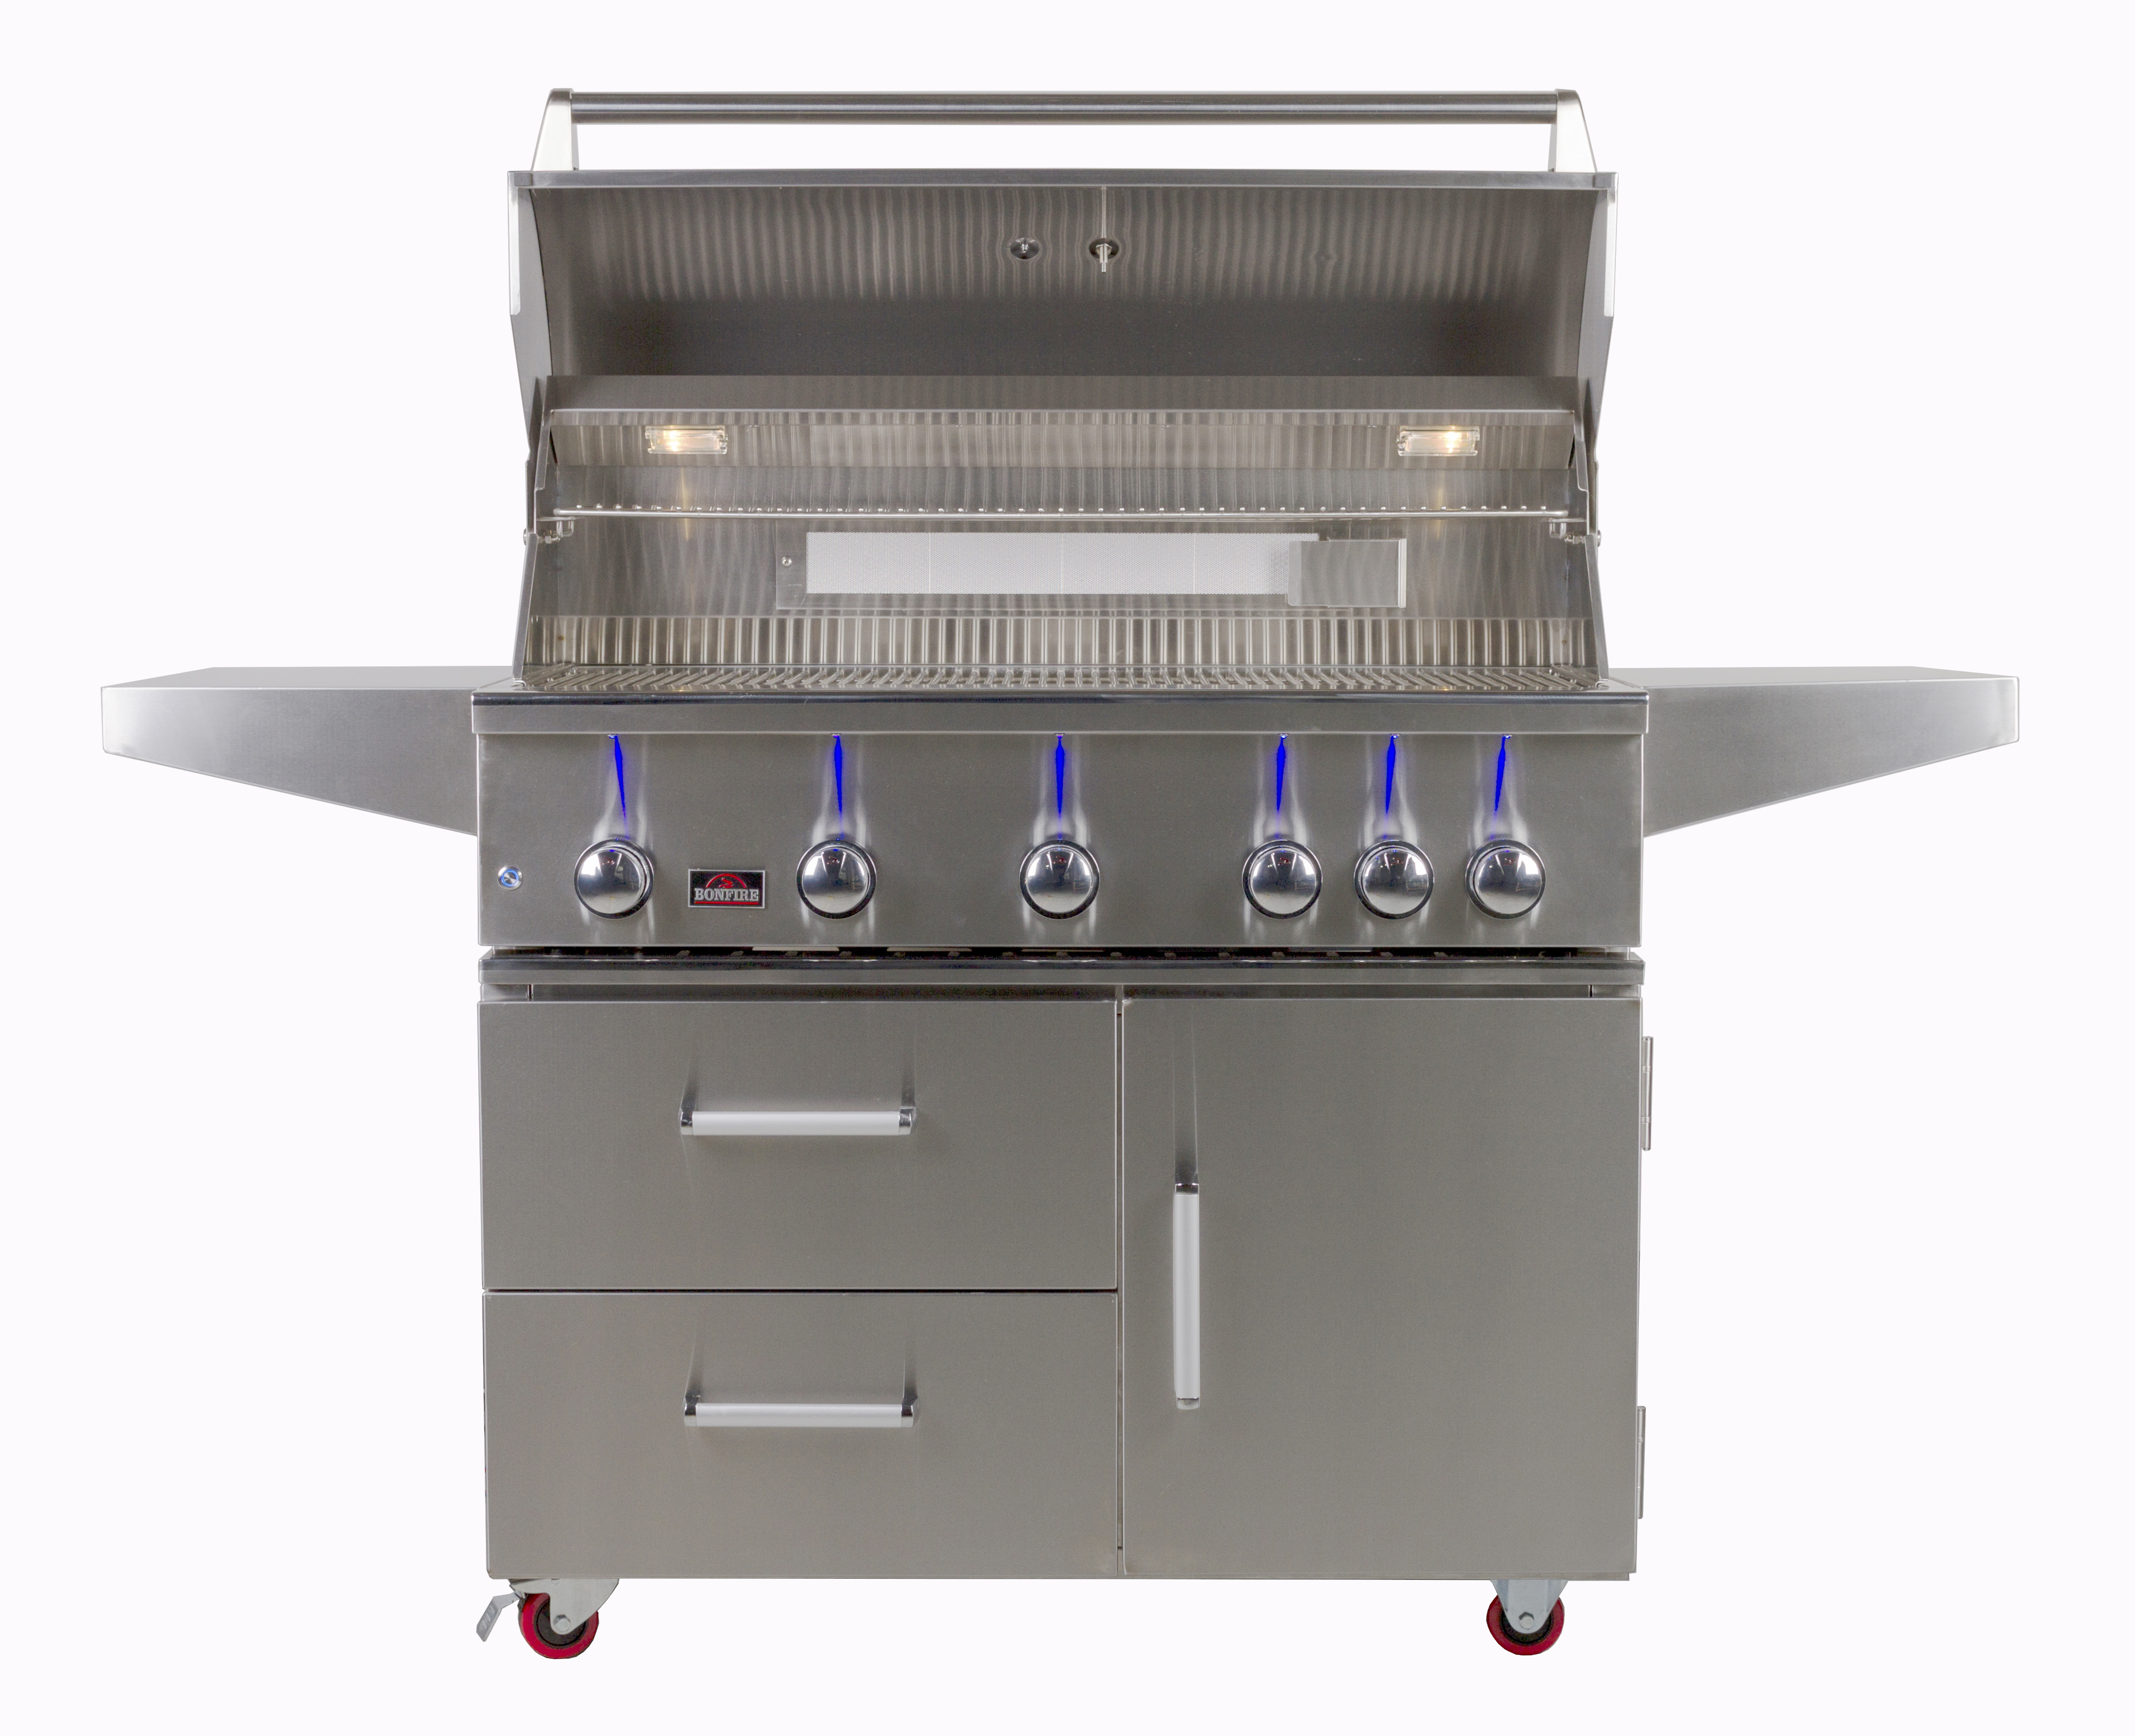 Bonfire 42 Cbb500cdc Premium Gas Grill On A Cart Stainless Steel Universal Propane Grill Light Inc Name Category